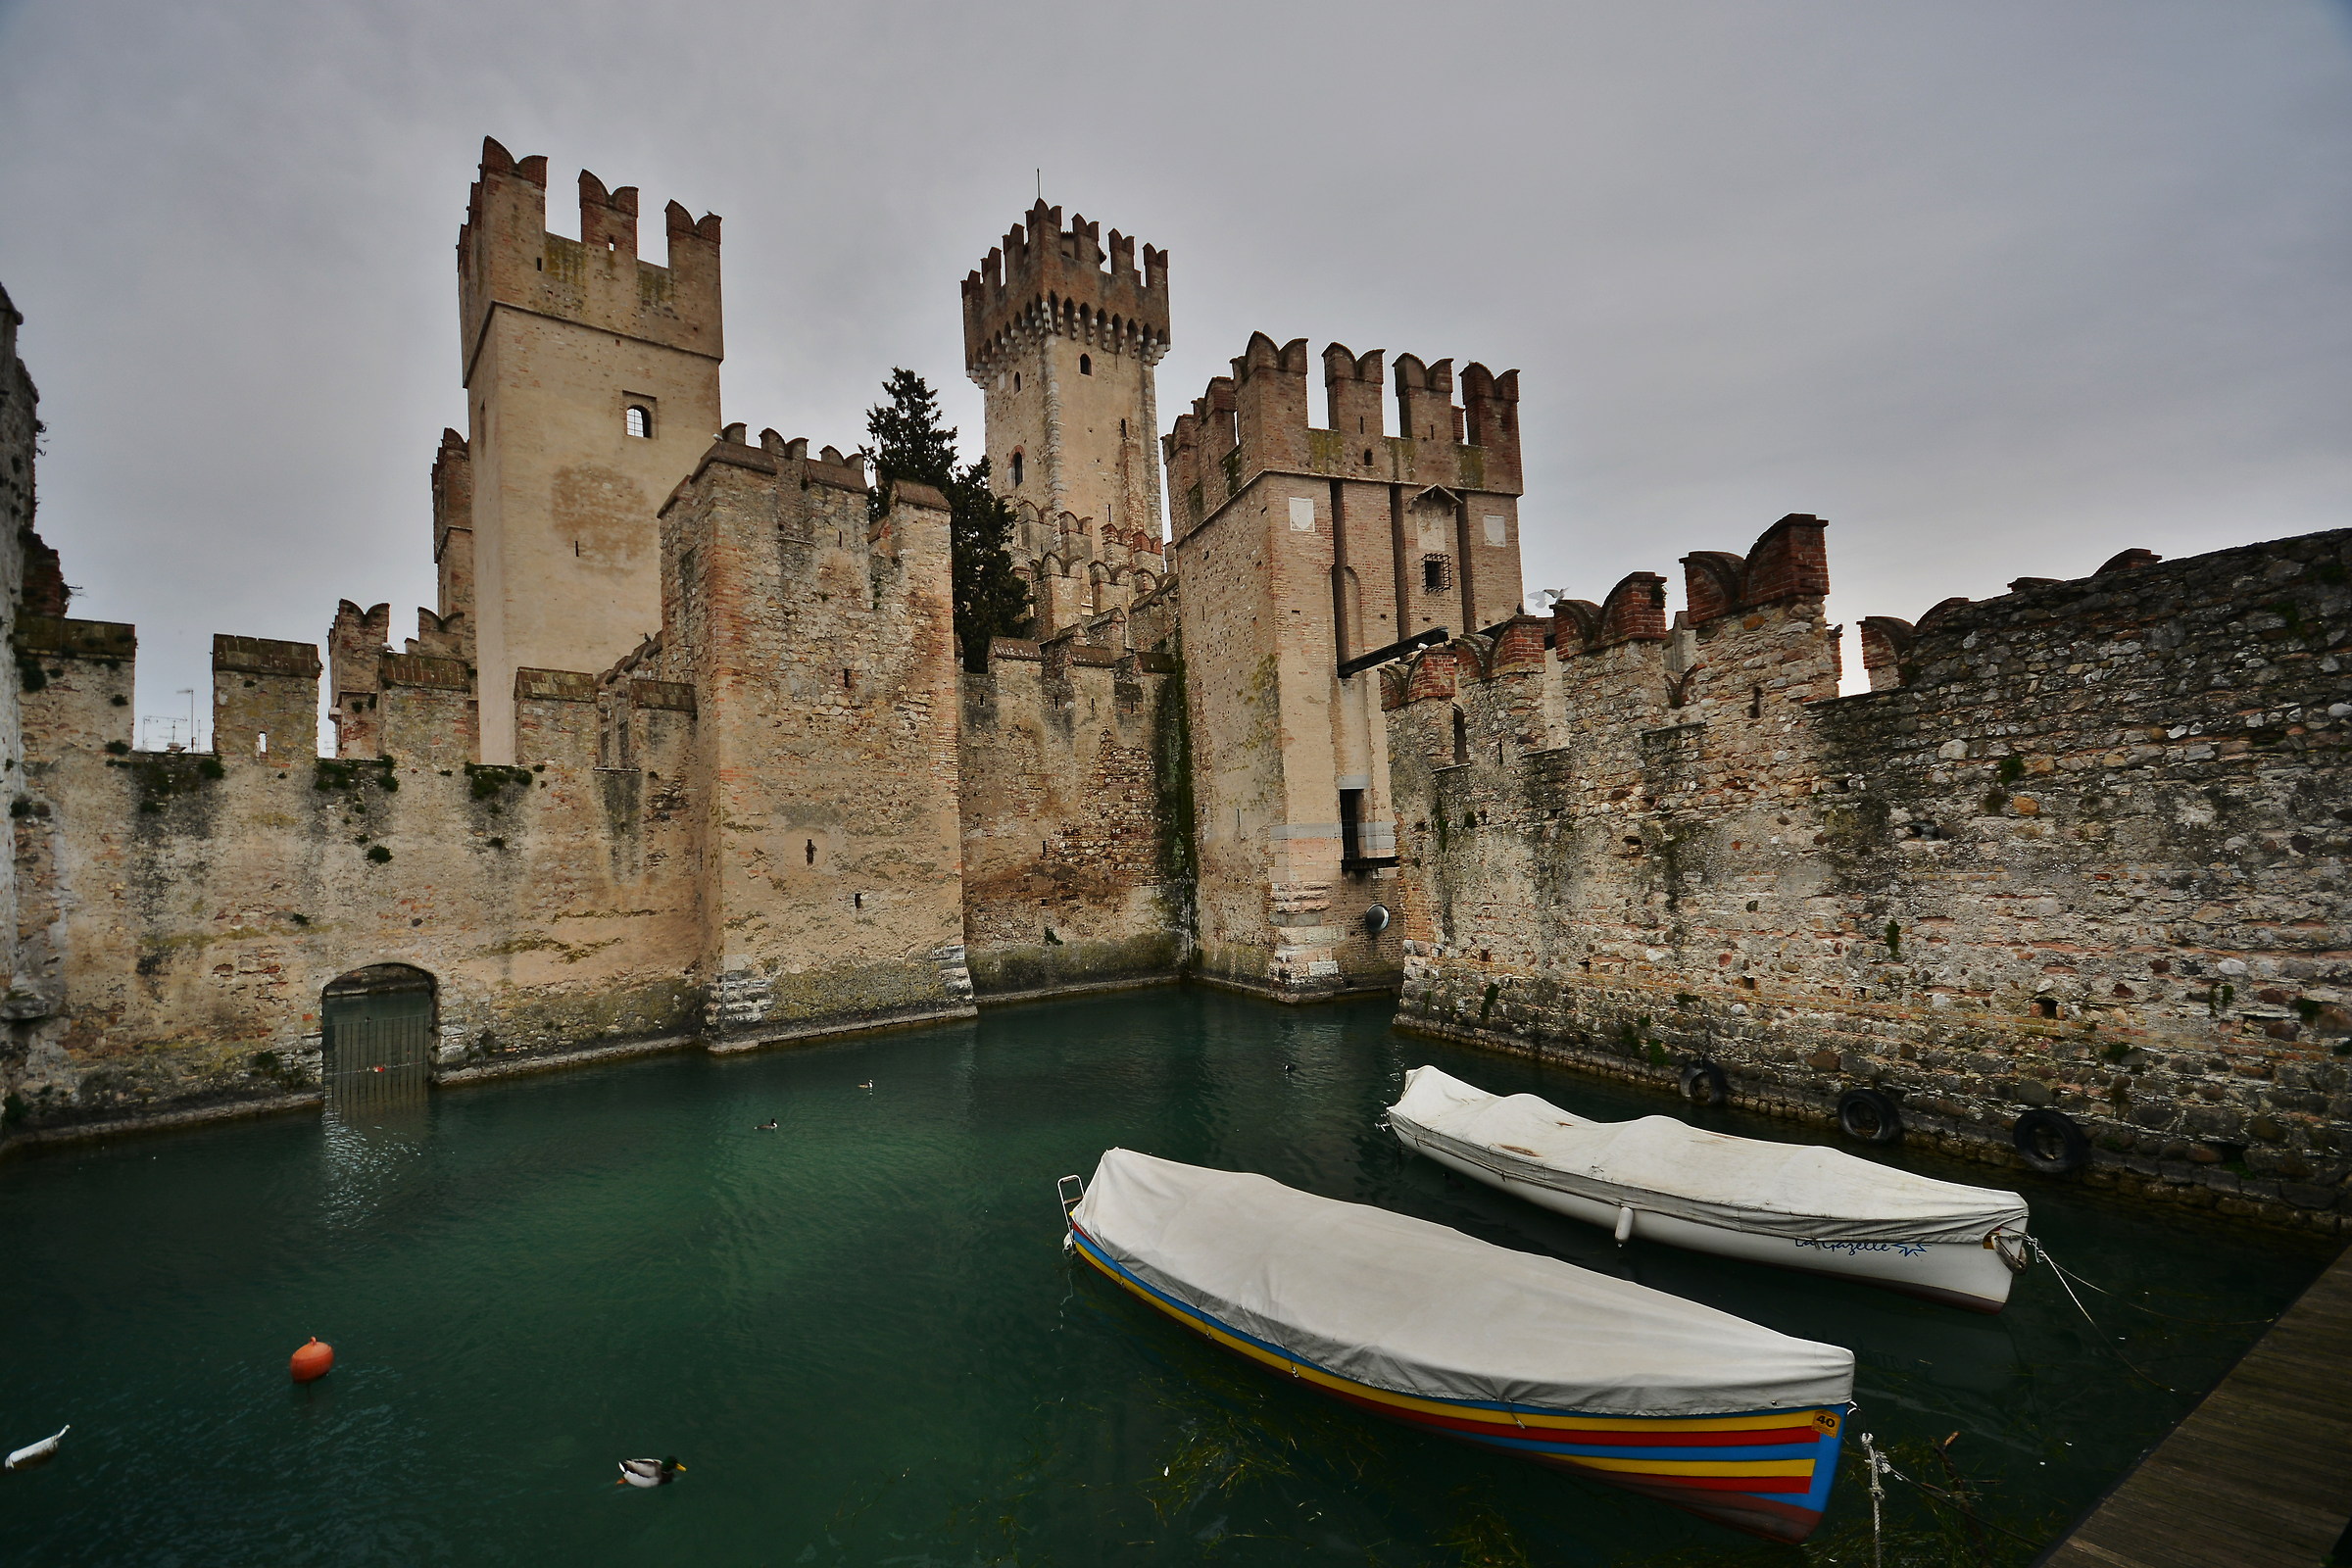 The castle_sirmione...